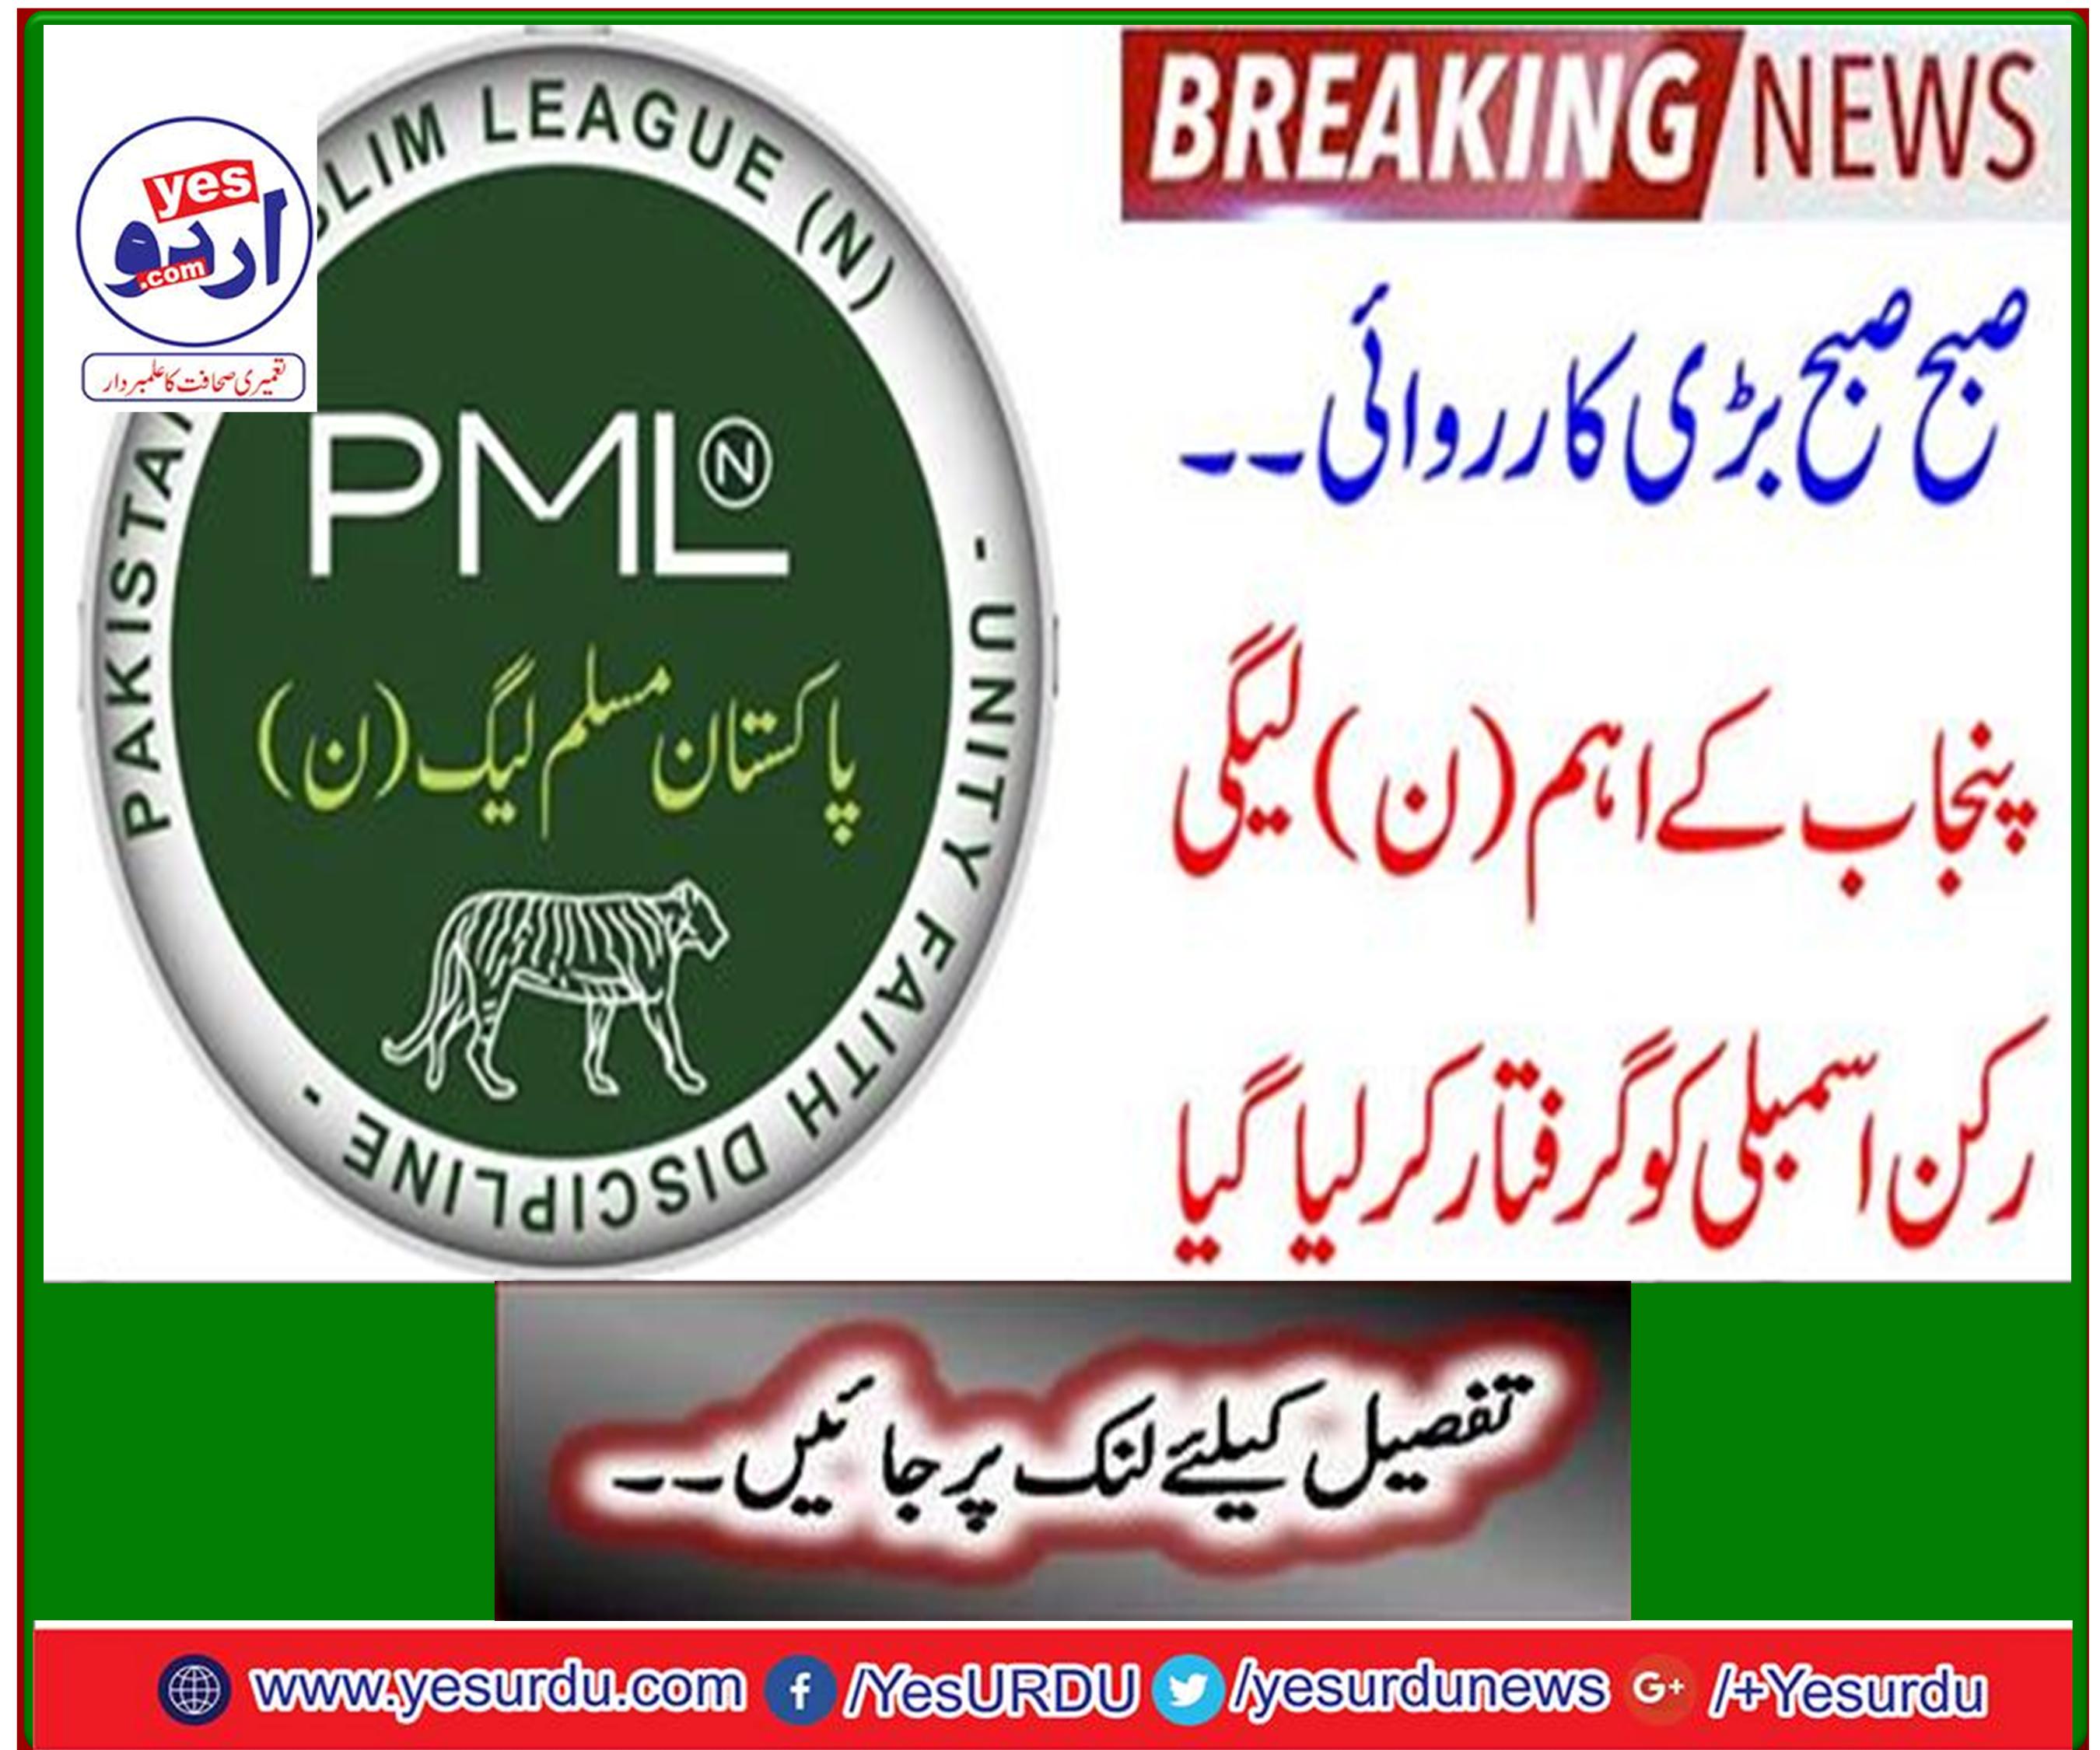 Breaking News: Great action in the morning ... Punjab Assembly of Major N-League member was arrested